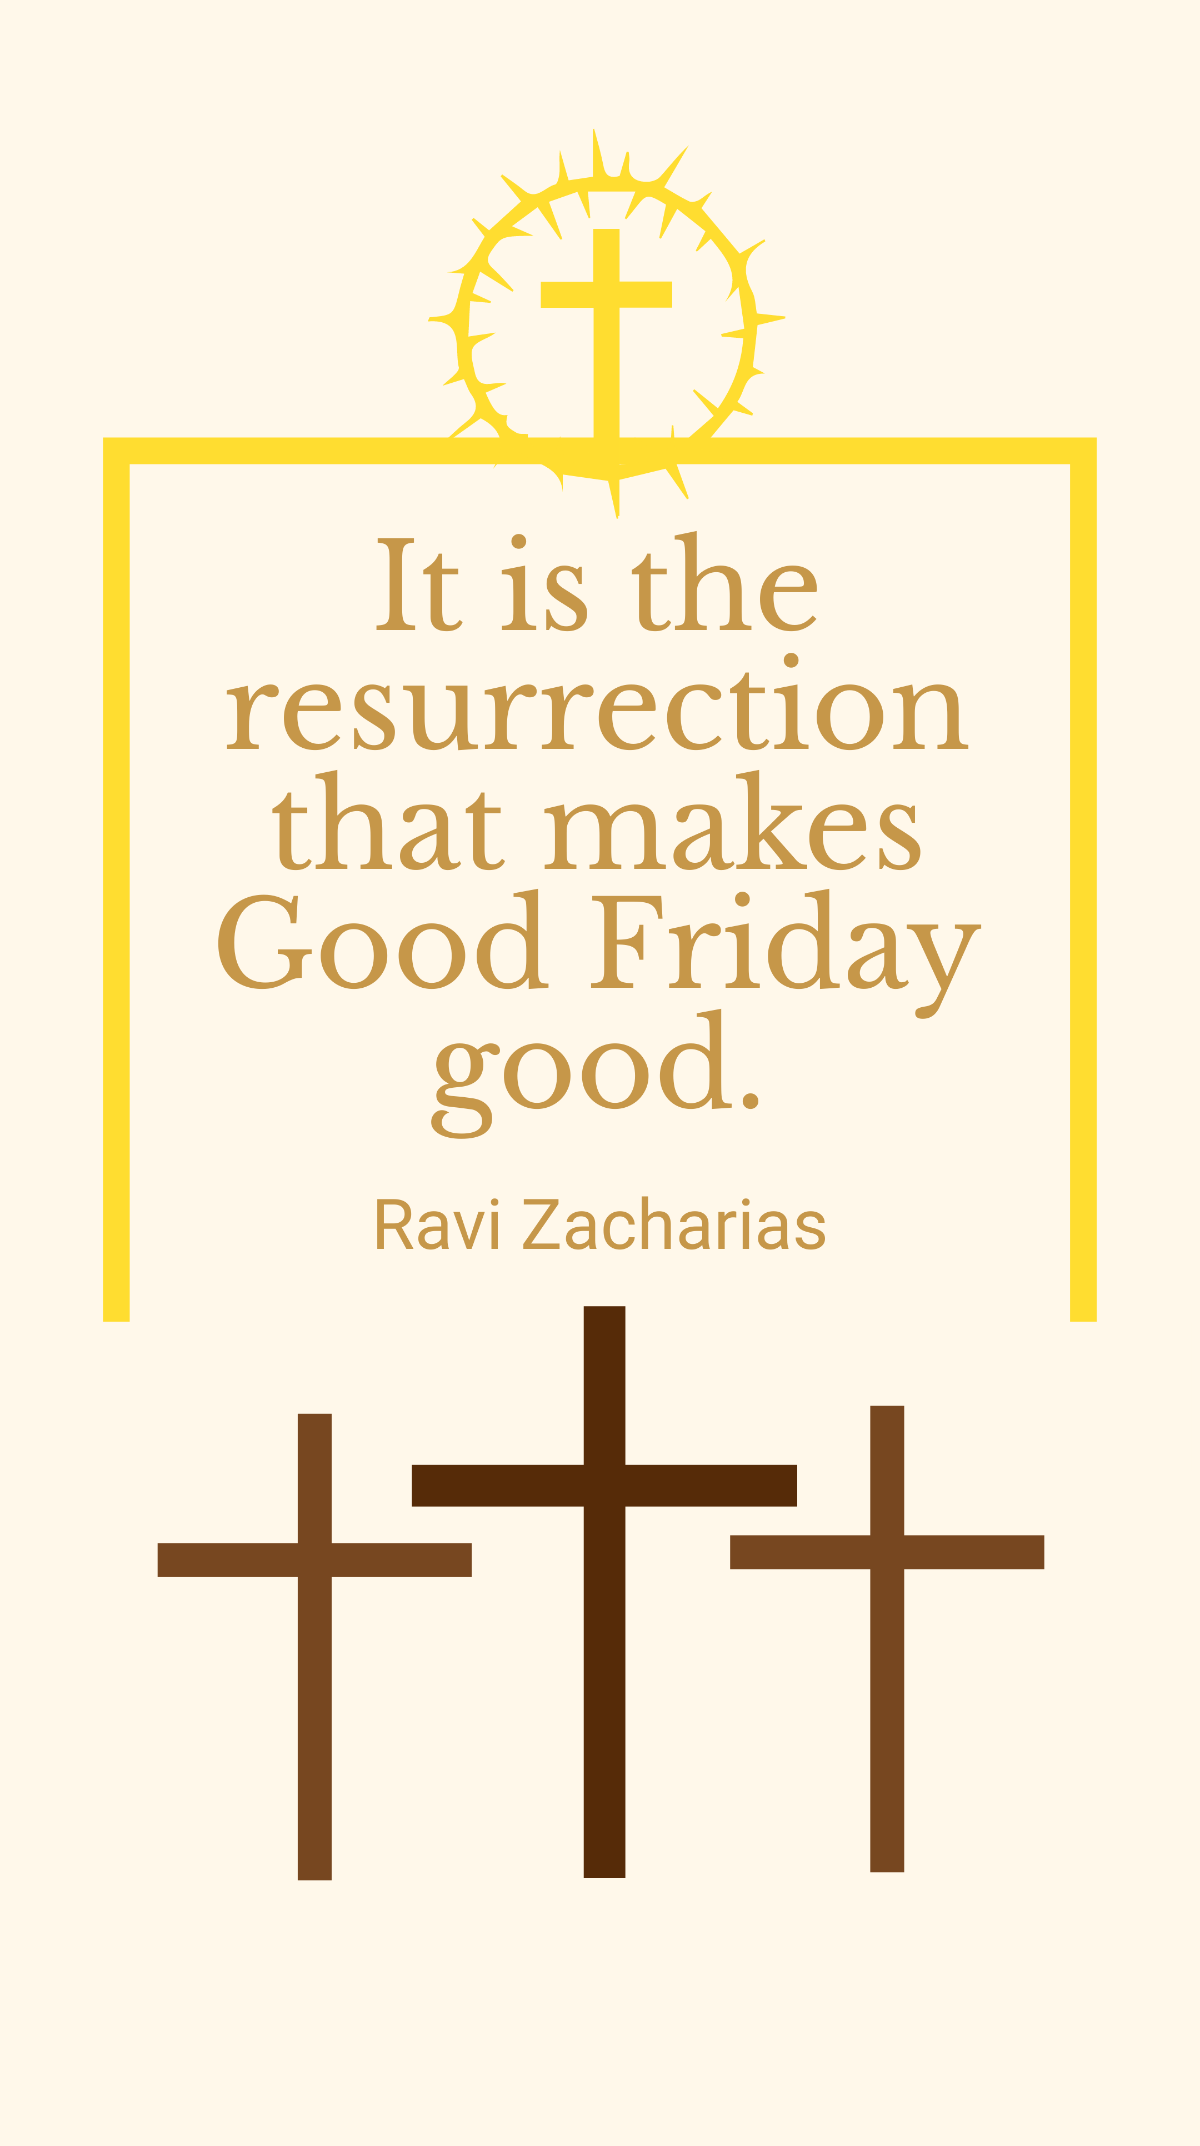 Ravi Zacharias - It is the resurrection that makes Good Friday good. Template